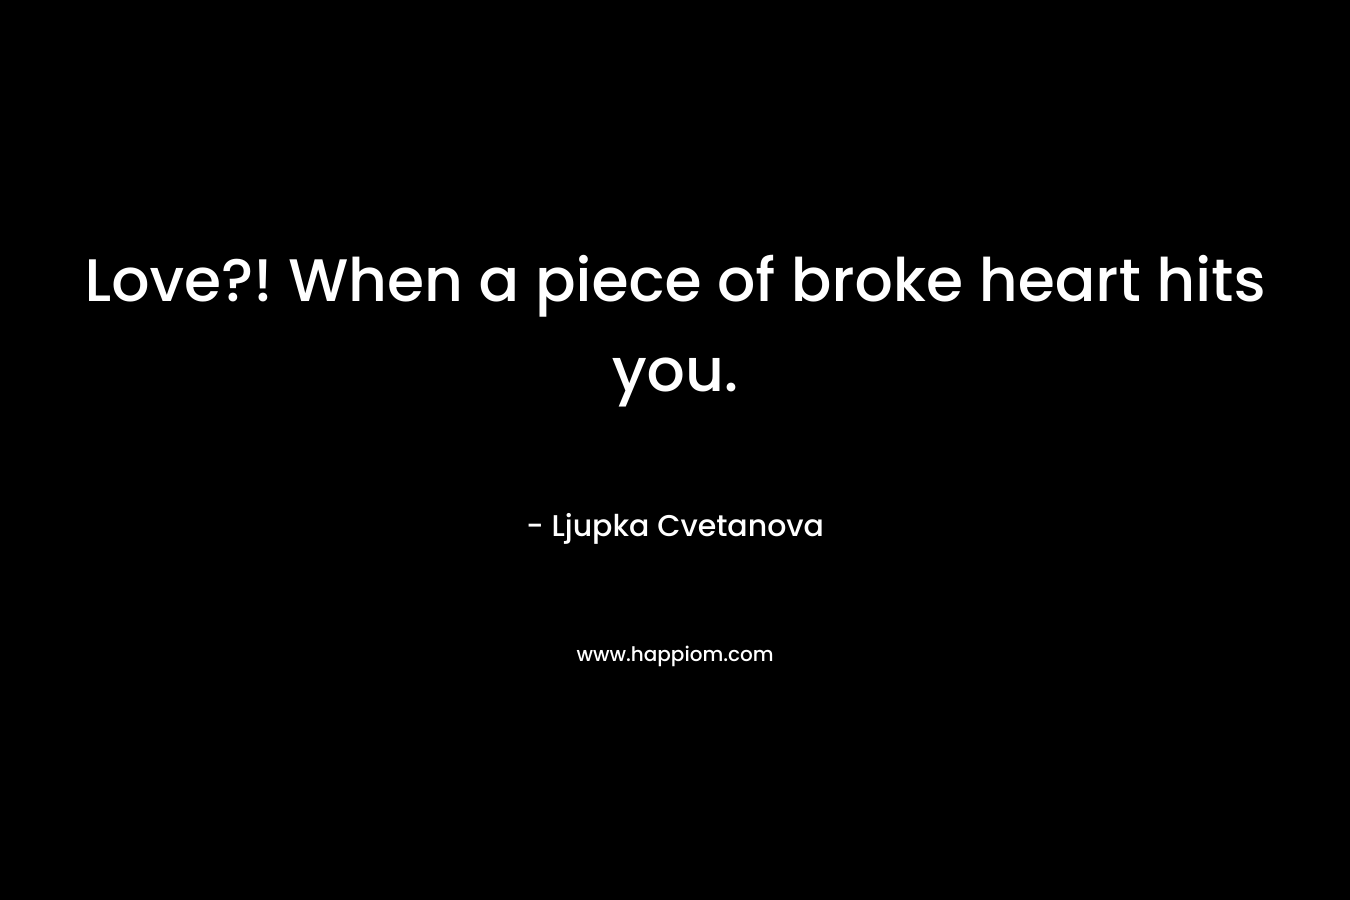 Love?! When a piece of broke heart hits you.